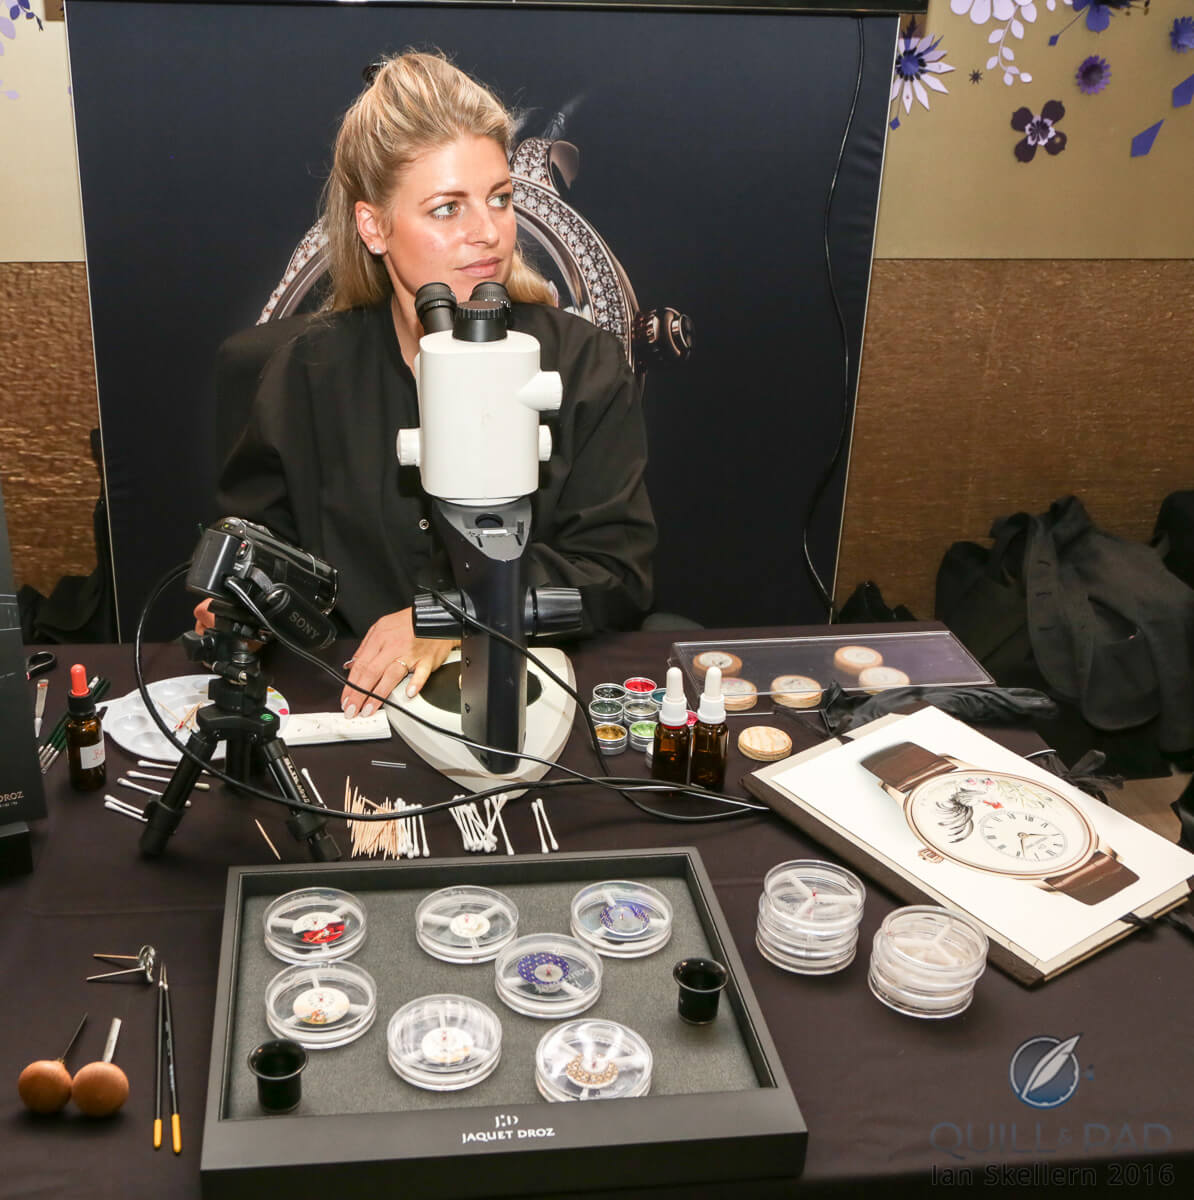 Demonstration of miniature painting with enamel by Jaquet Droz at SalonQP 2016